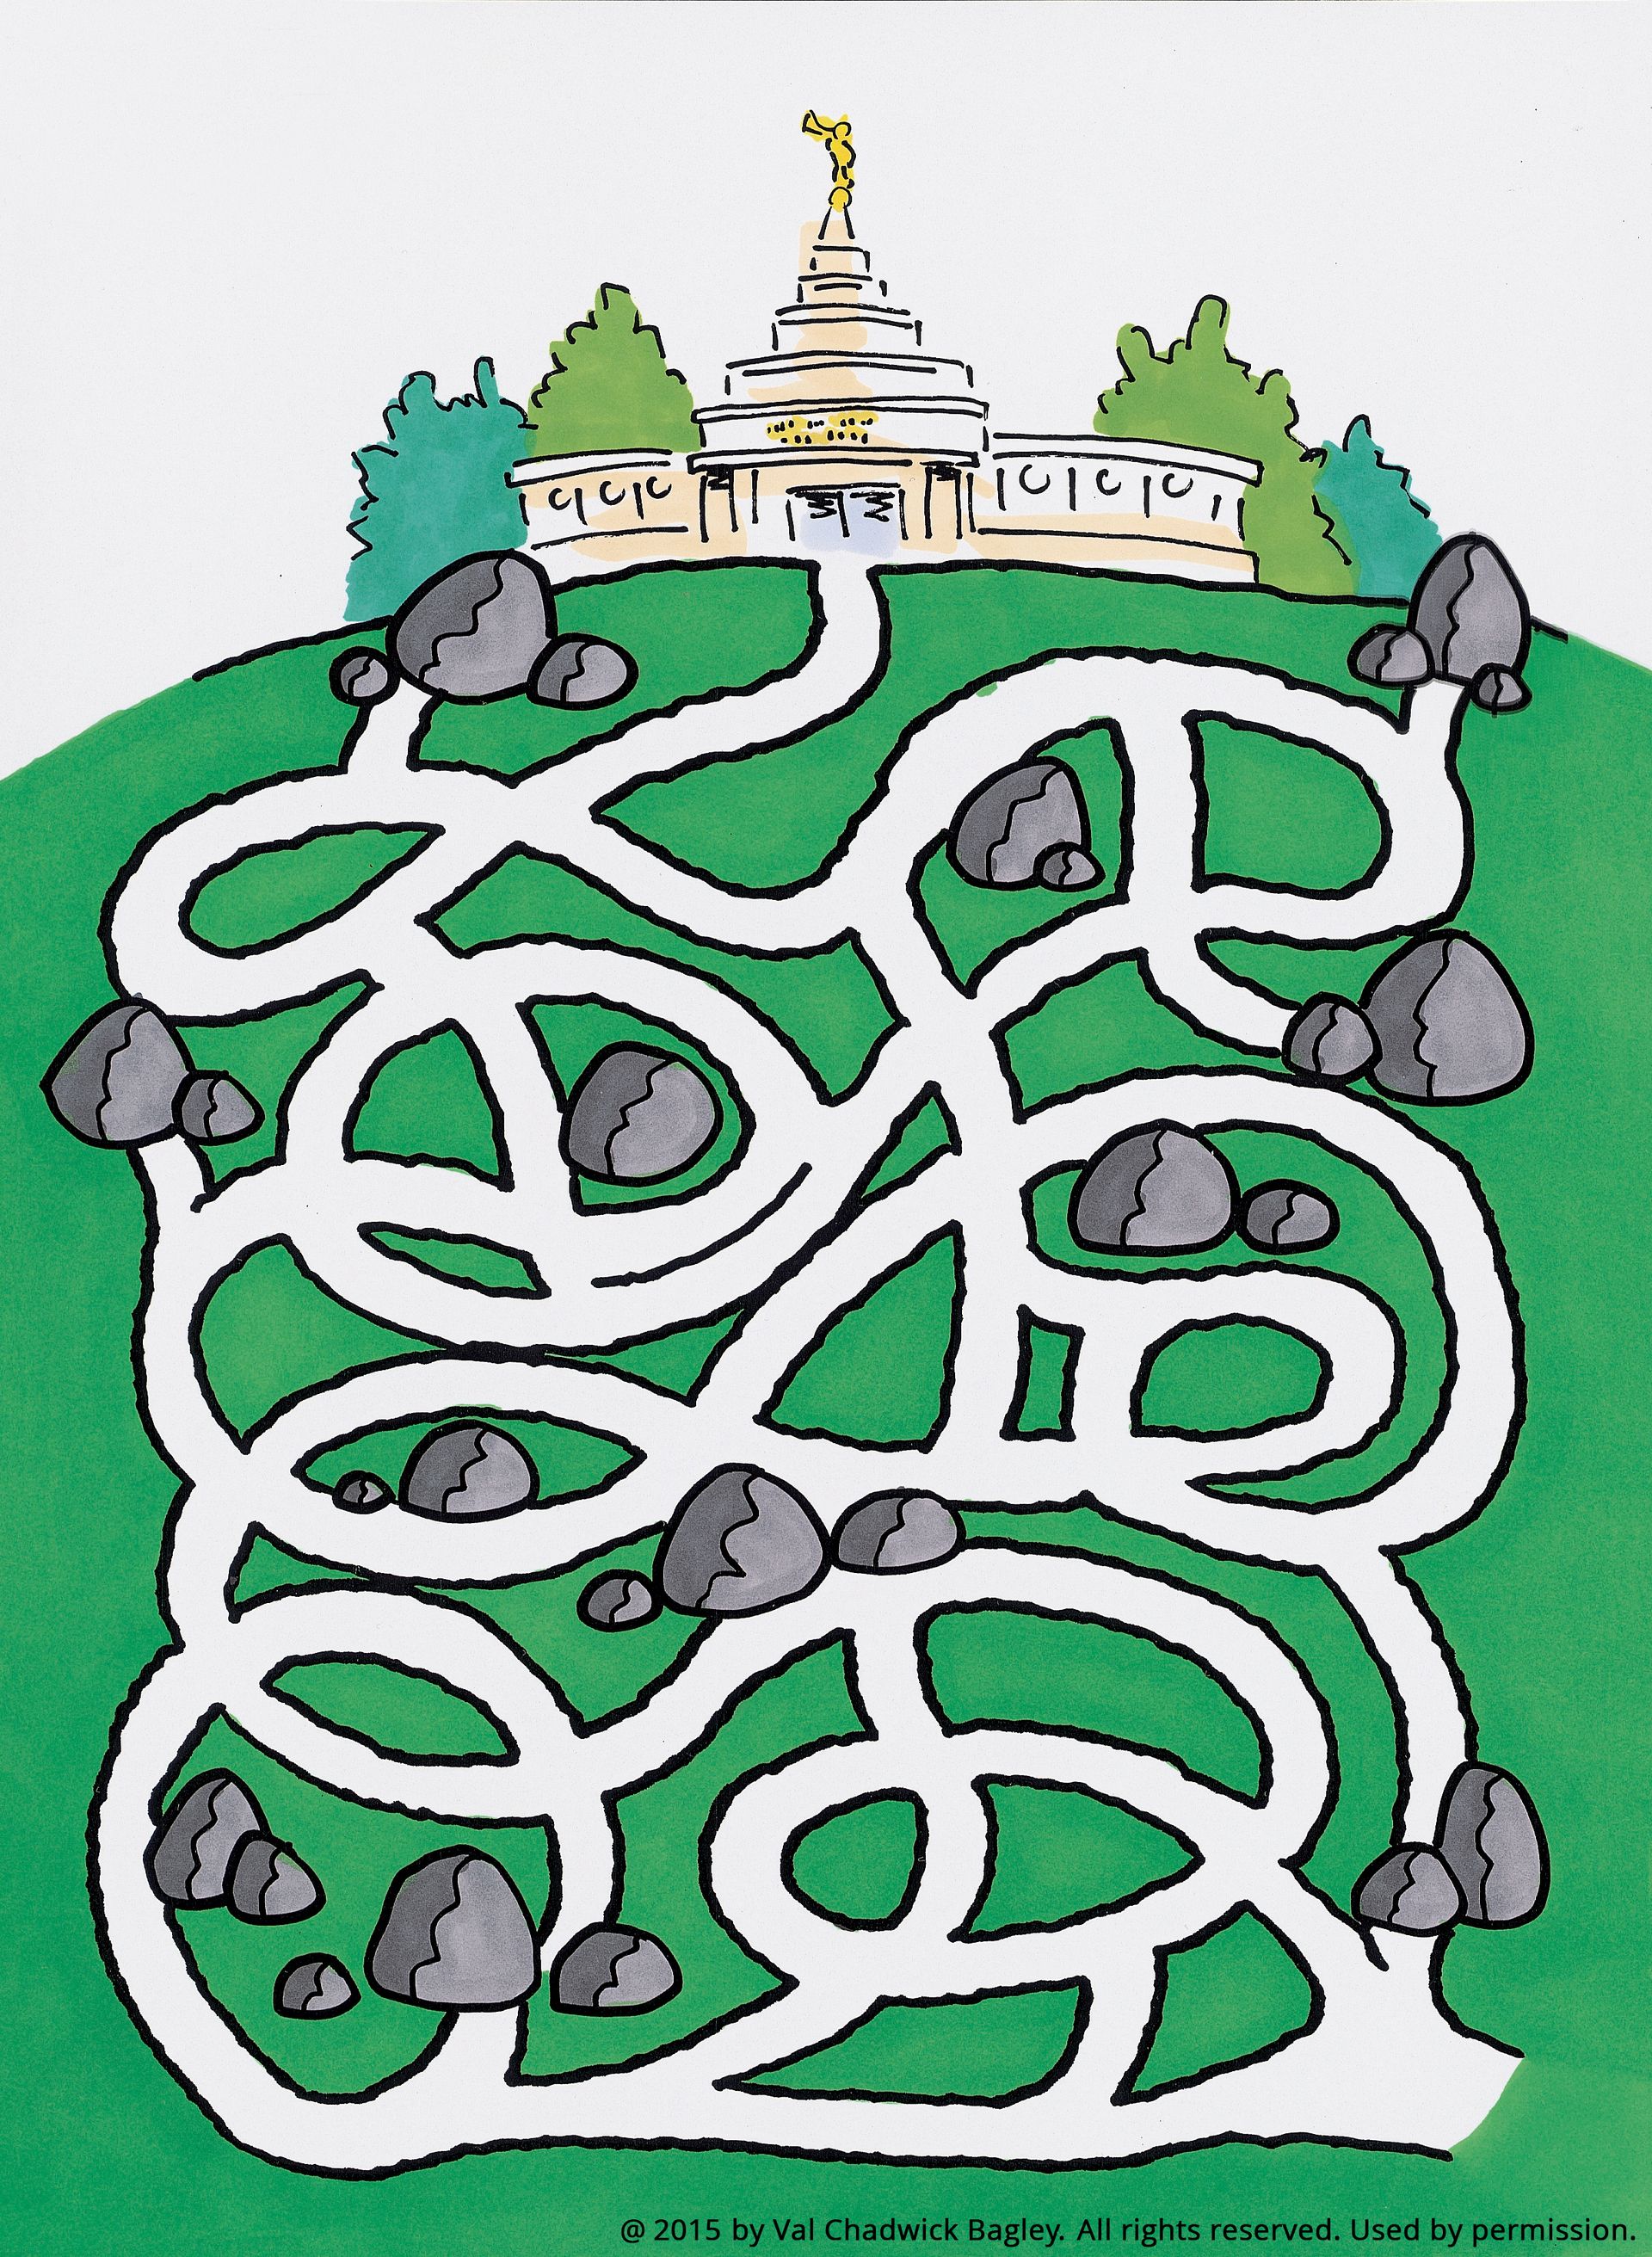 A dirt-trail maze starting at the bottom of the page and leading to a temple at the top.